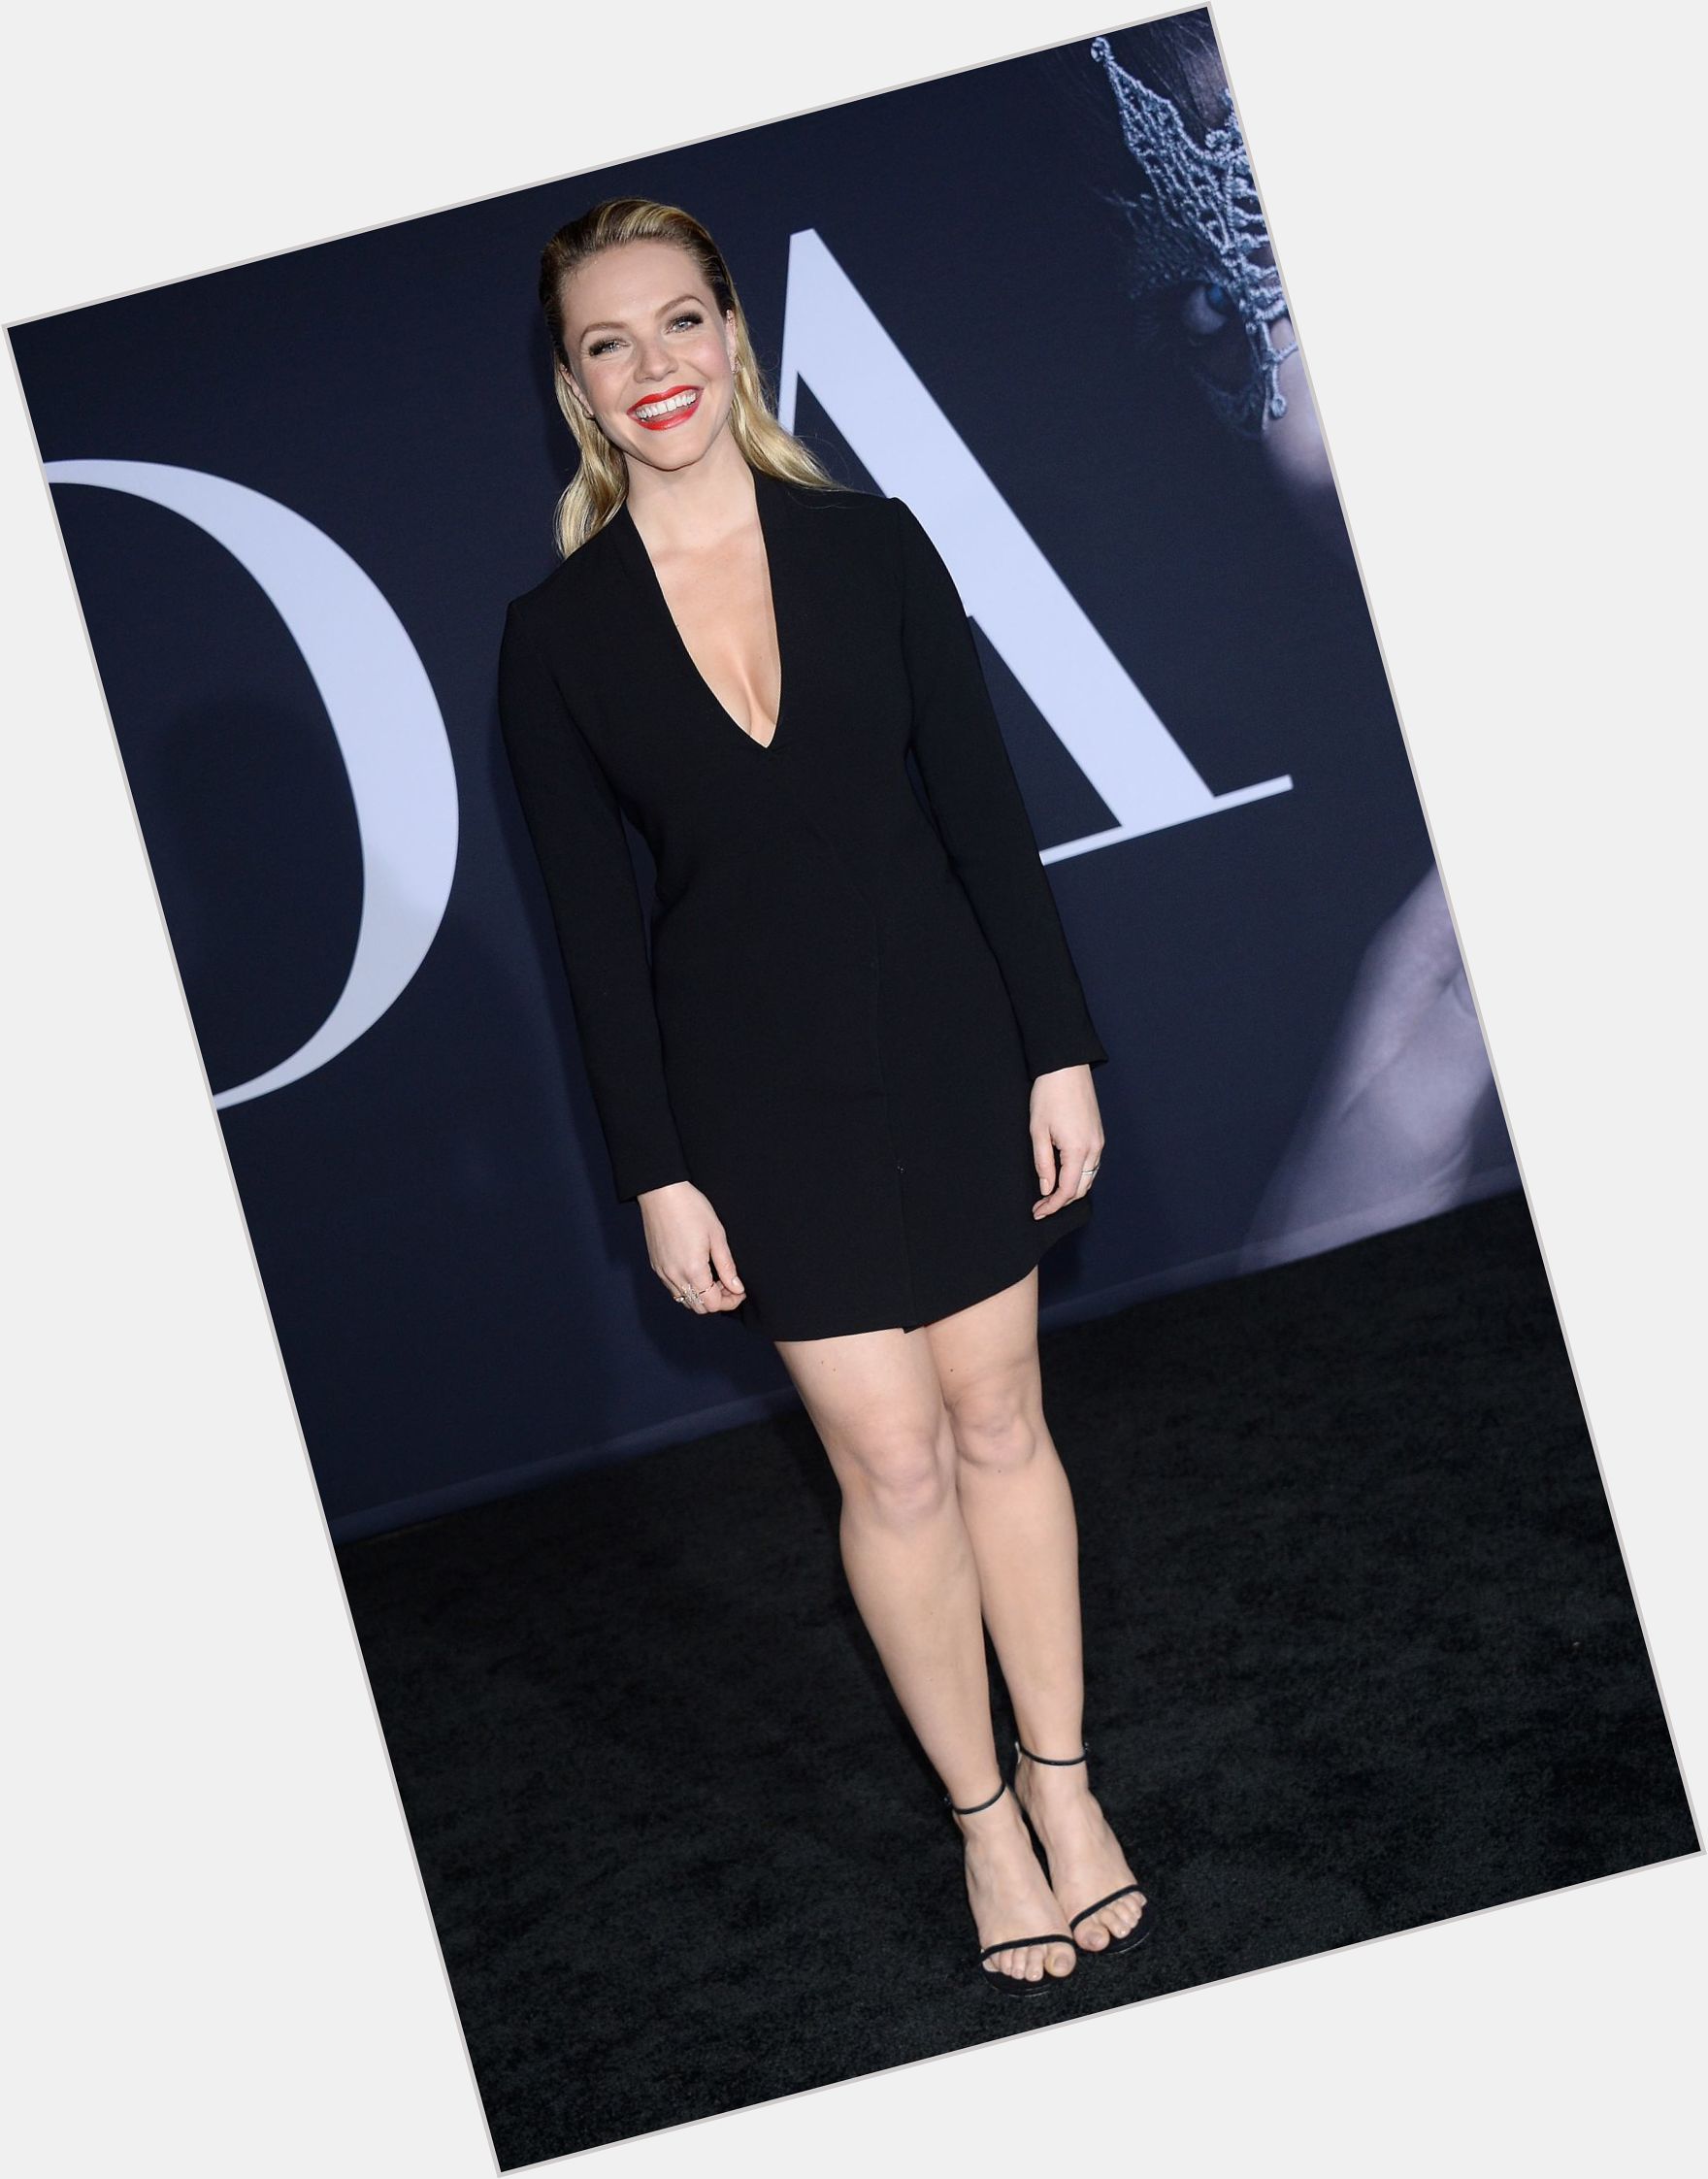 Eloise Mumford Official Site for Woman Crush Wednesday #WCW